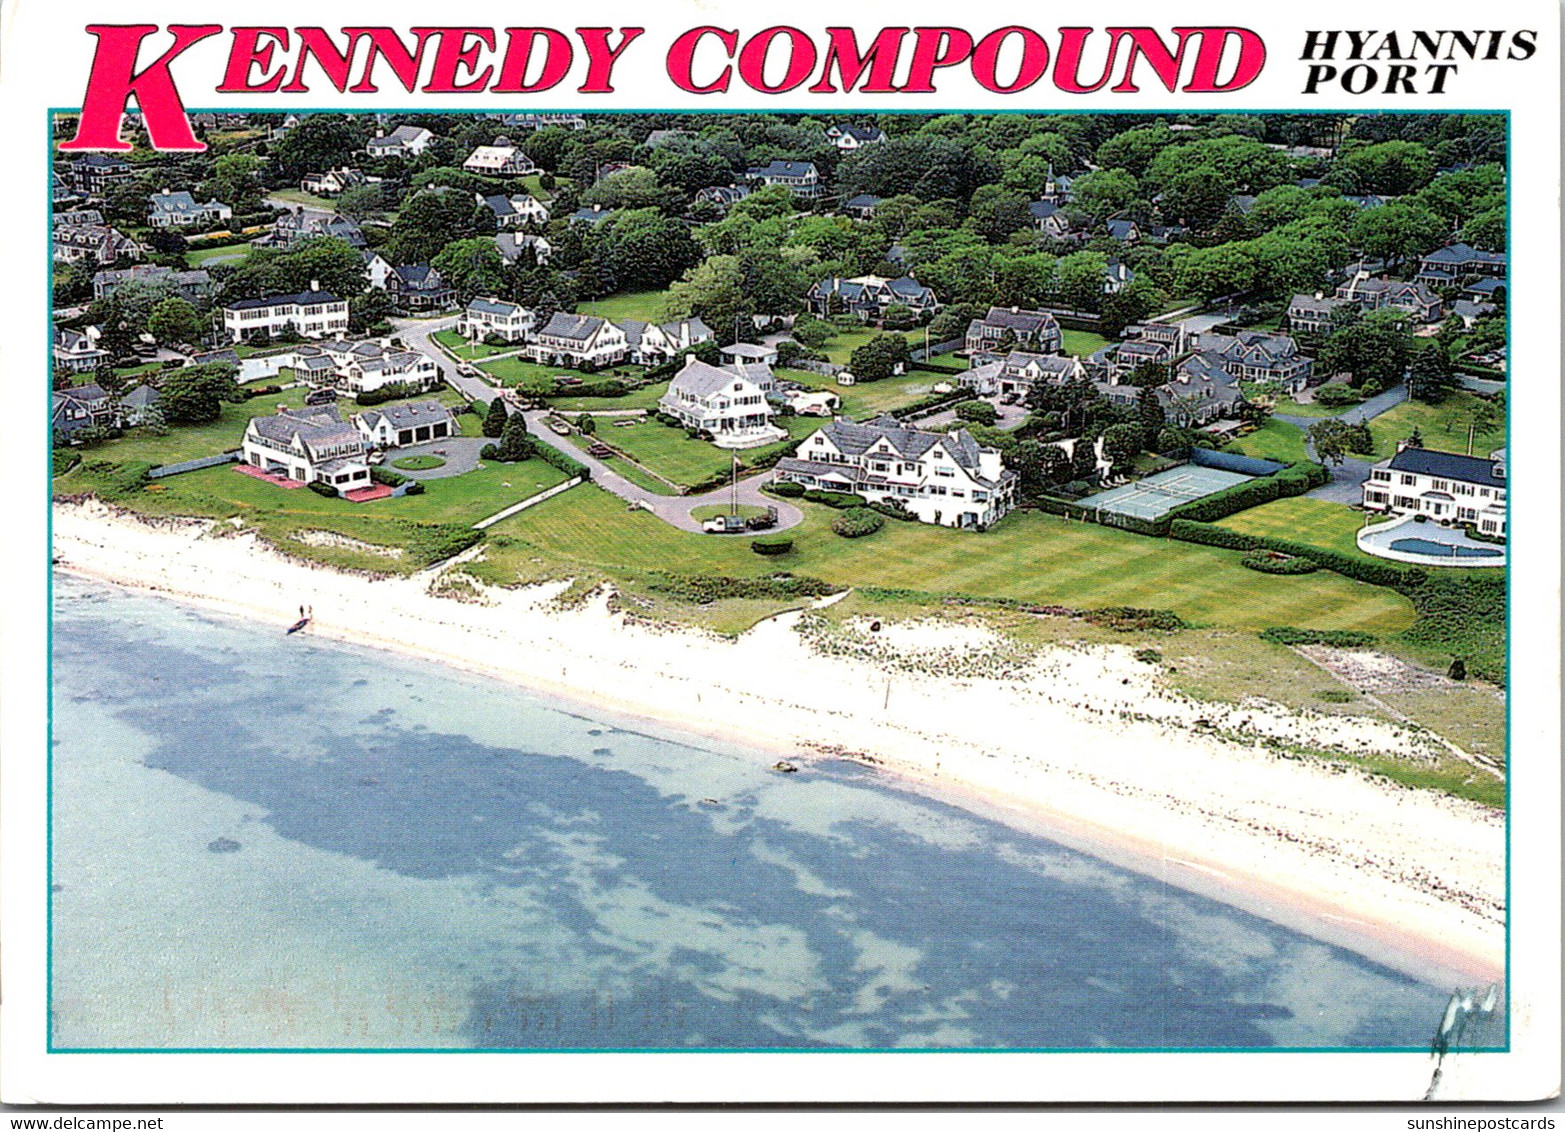 Massachusetts Cape Cod Hyannis Port Aerial View Of The Kennedy Compound 2004 - Cape Cod